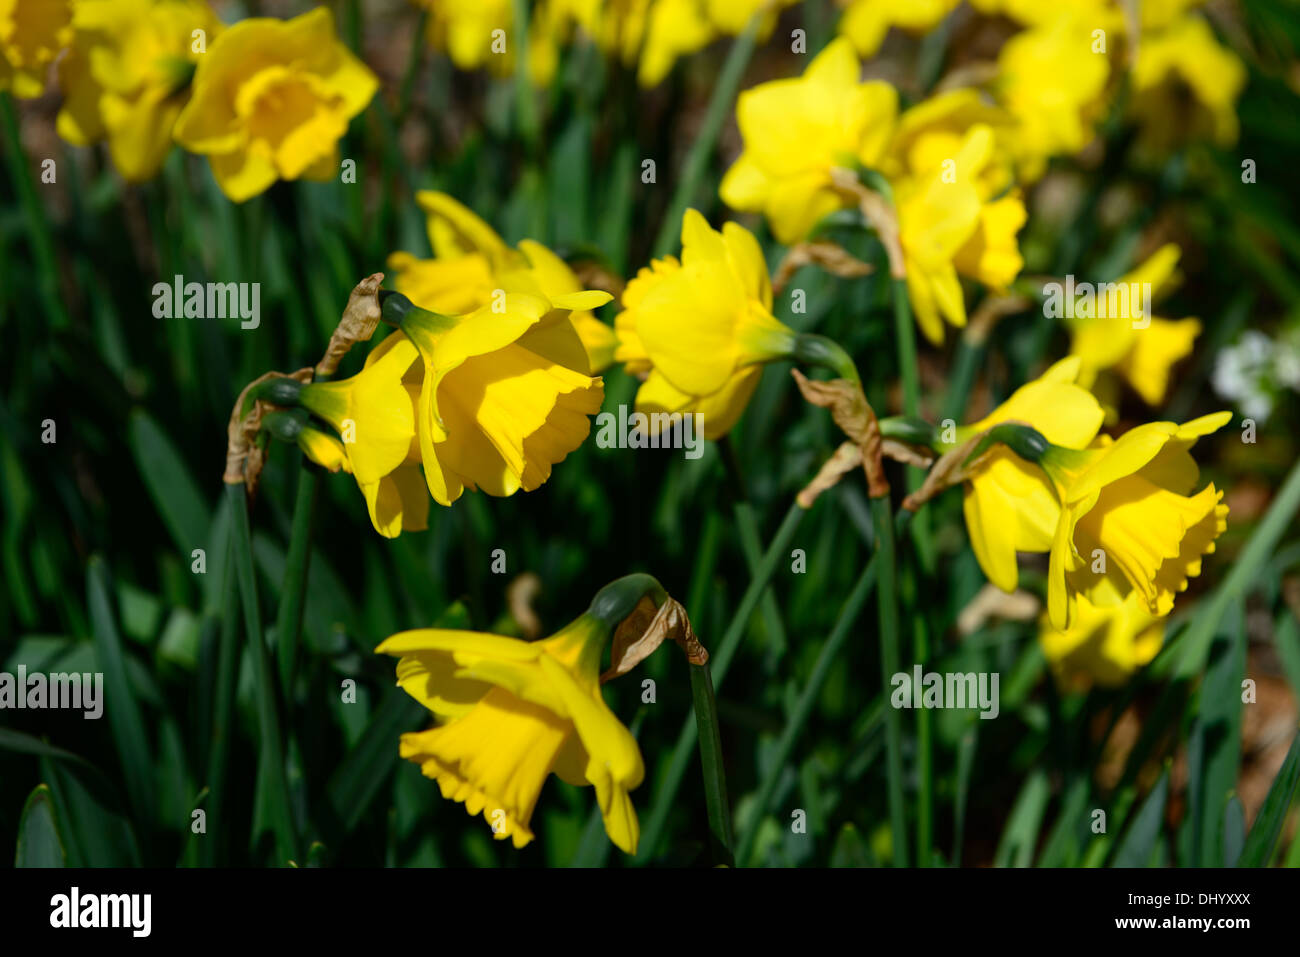 narcissus rose royale yellow daffodil flowers drift bed spring closeup plant portraits flowering bloom blossom Stock Photo